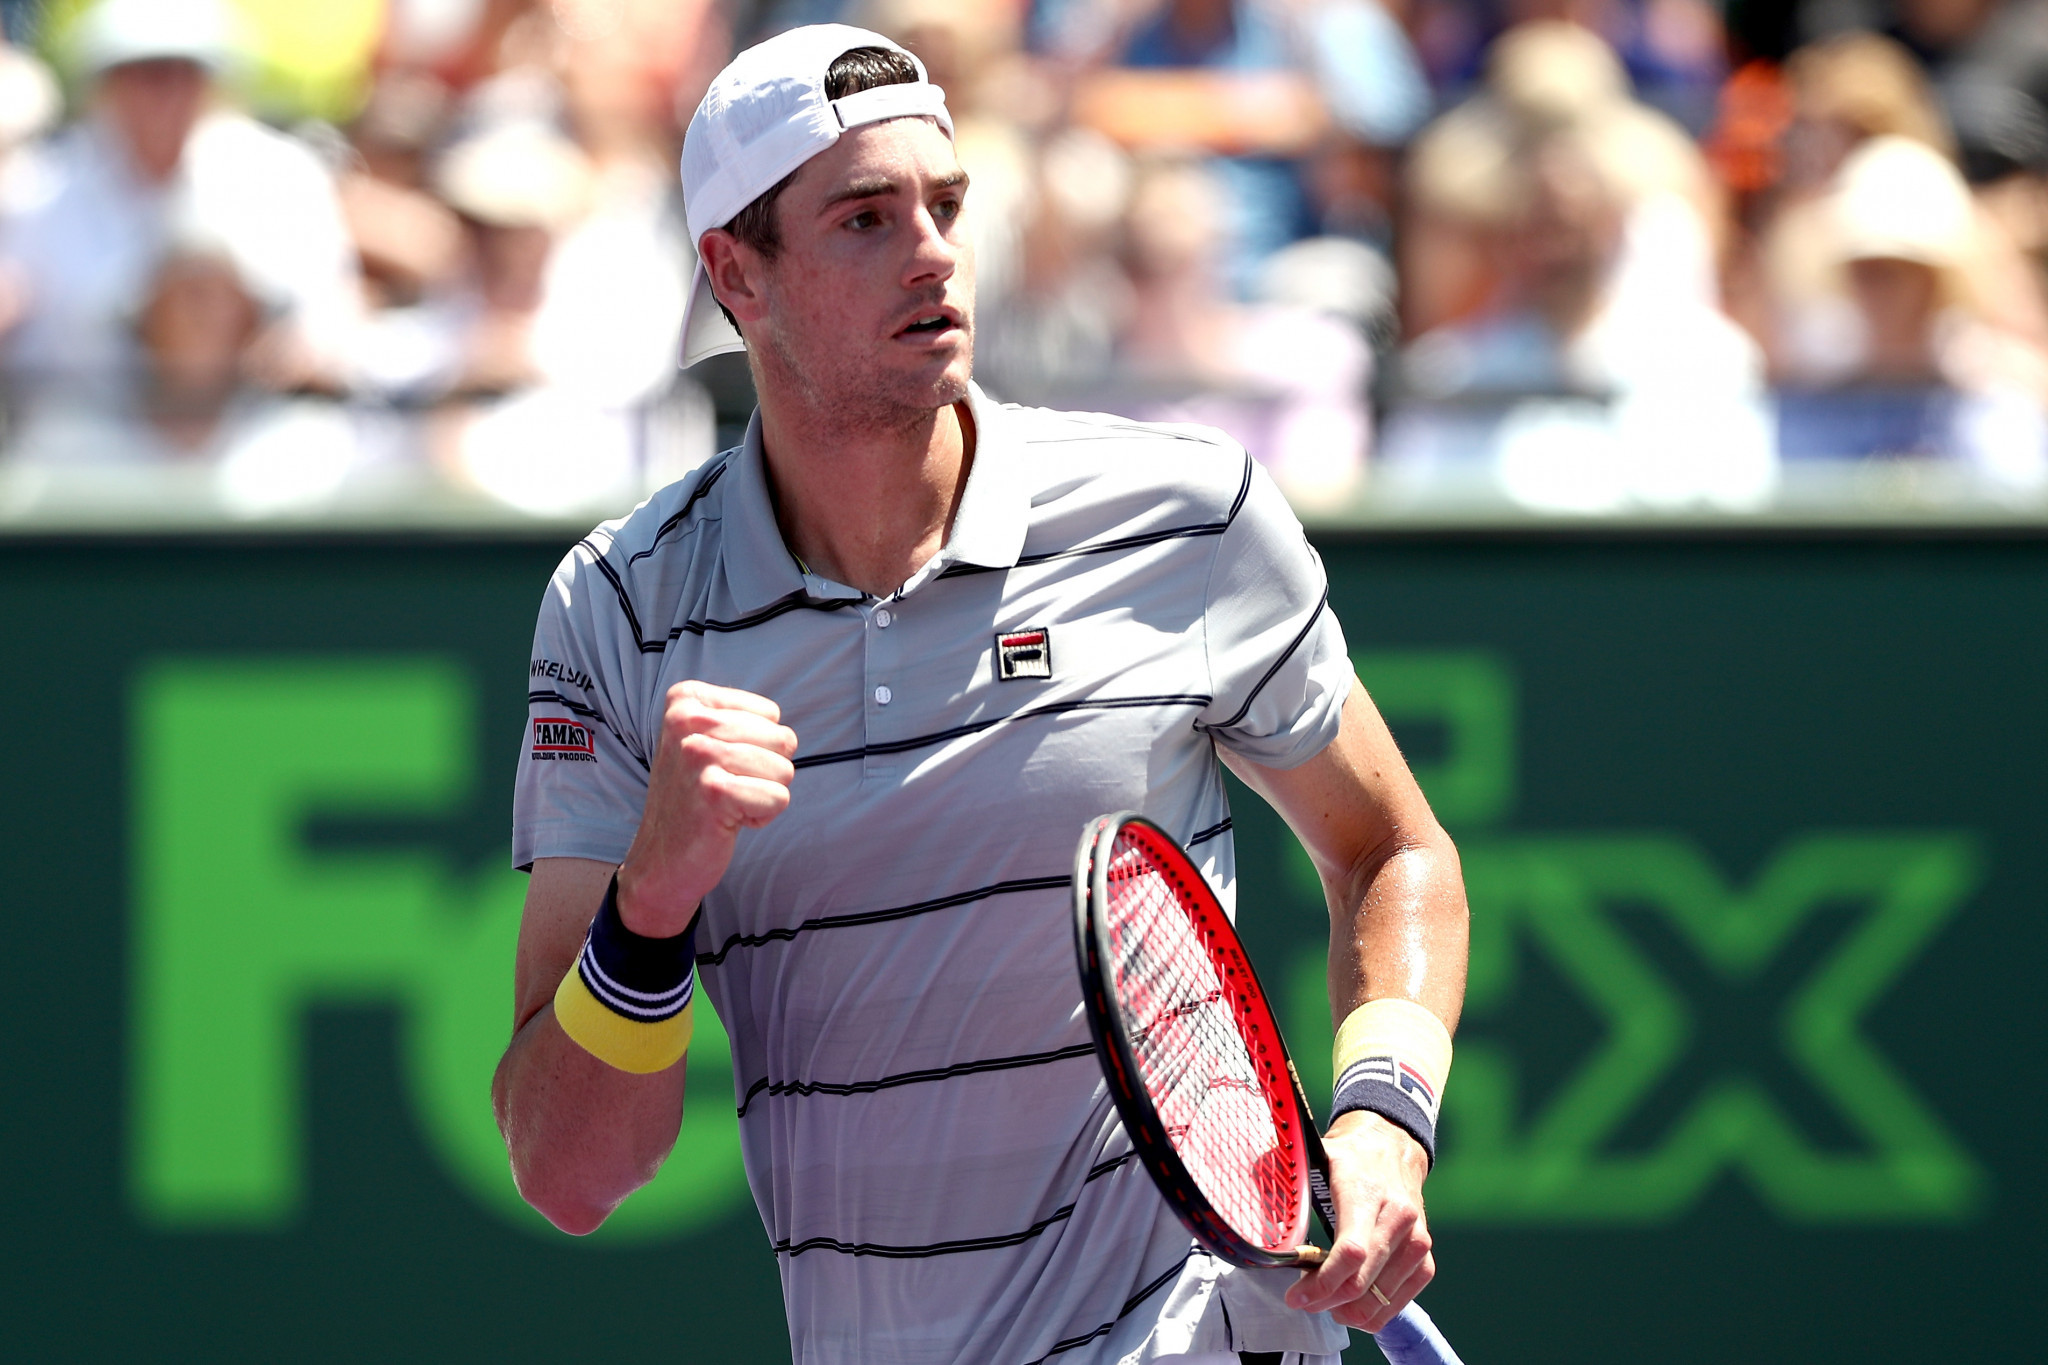 John Isner of the United States fought back from a set down to clinch his first ATP Masters 1000 title ©Getty Imageswi